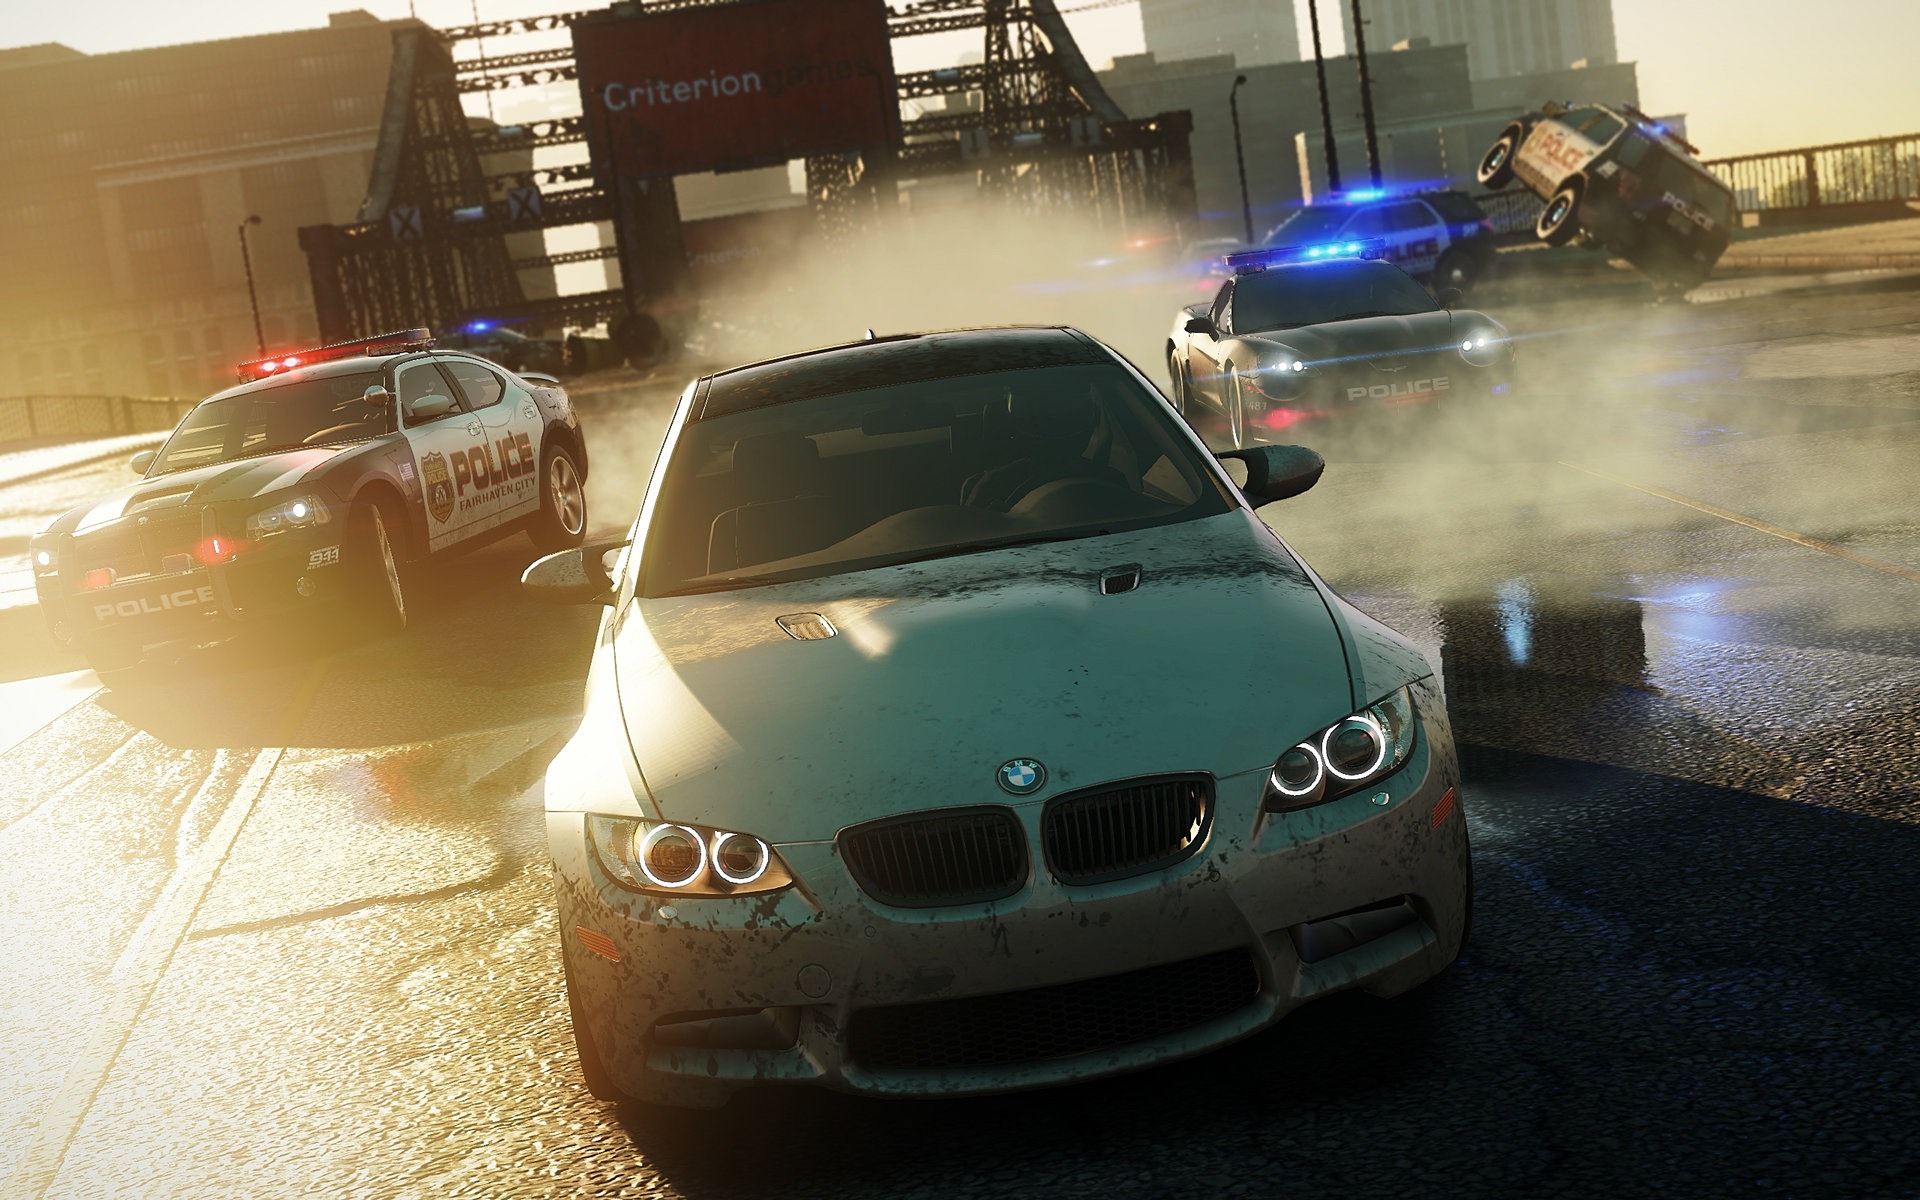 Need for Speed: Most Wanted 极品飞车17：最高通缉 高清壁纸19 - 1920x1200